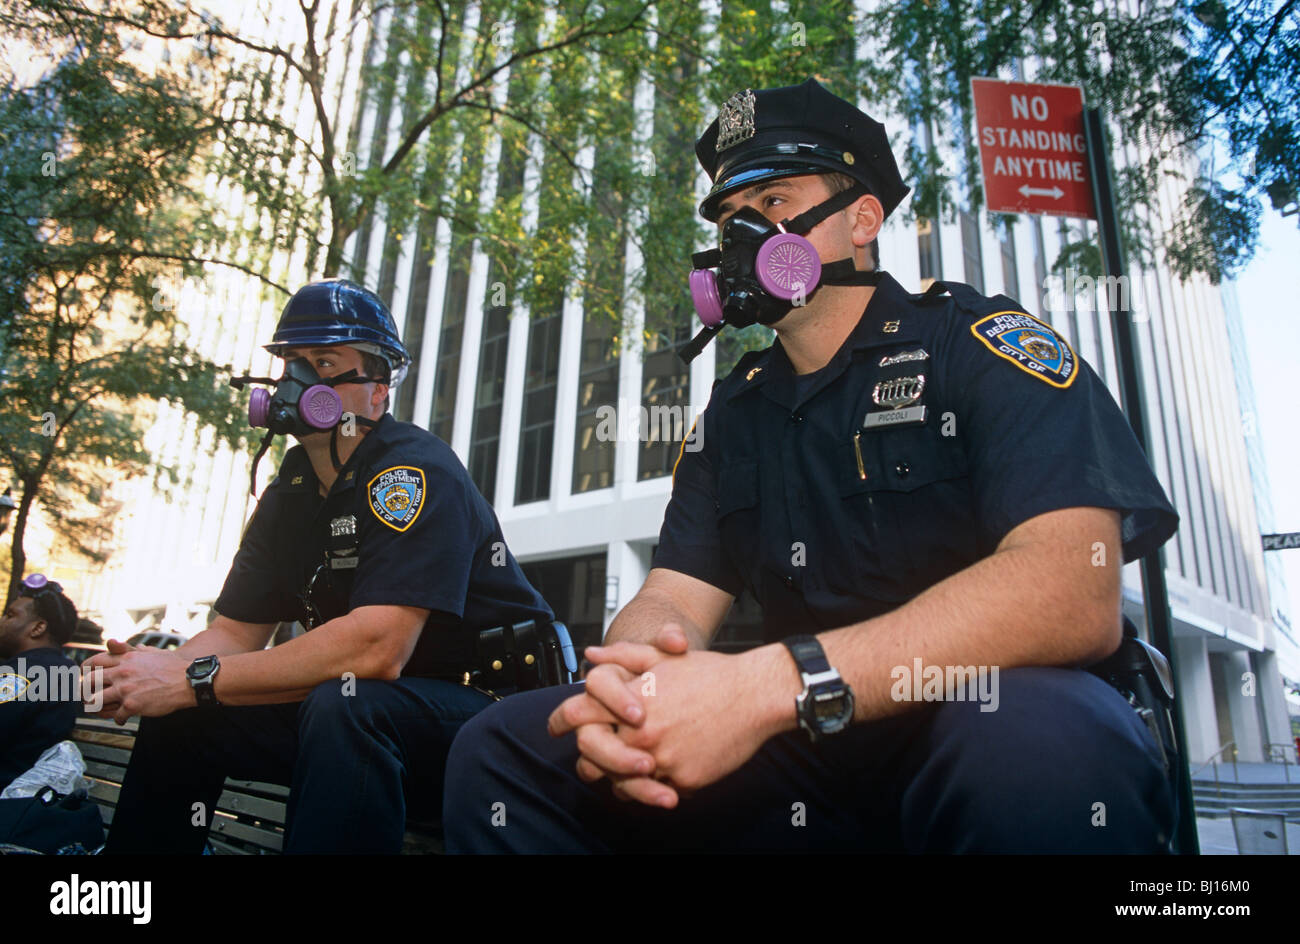 New York City Police officers (NYPD) relax after a harrowing day near Ground Zero a week after 9/11 terrorist attacks on America Stock Photo